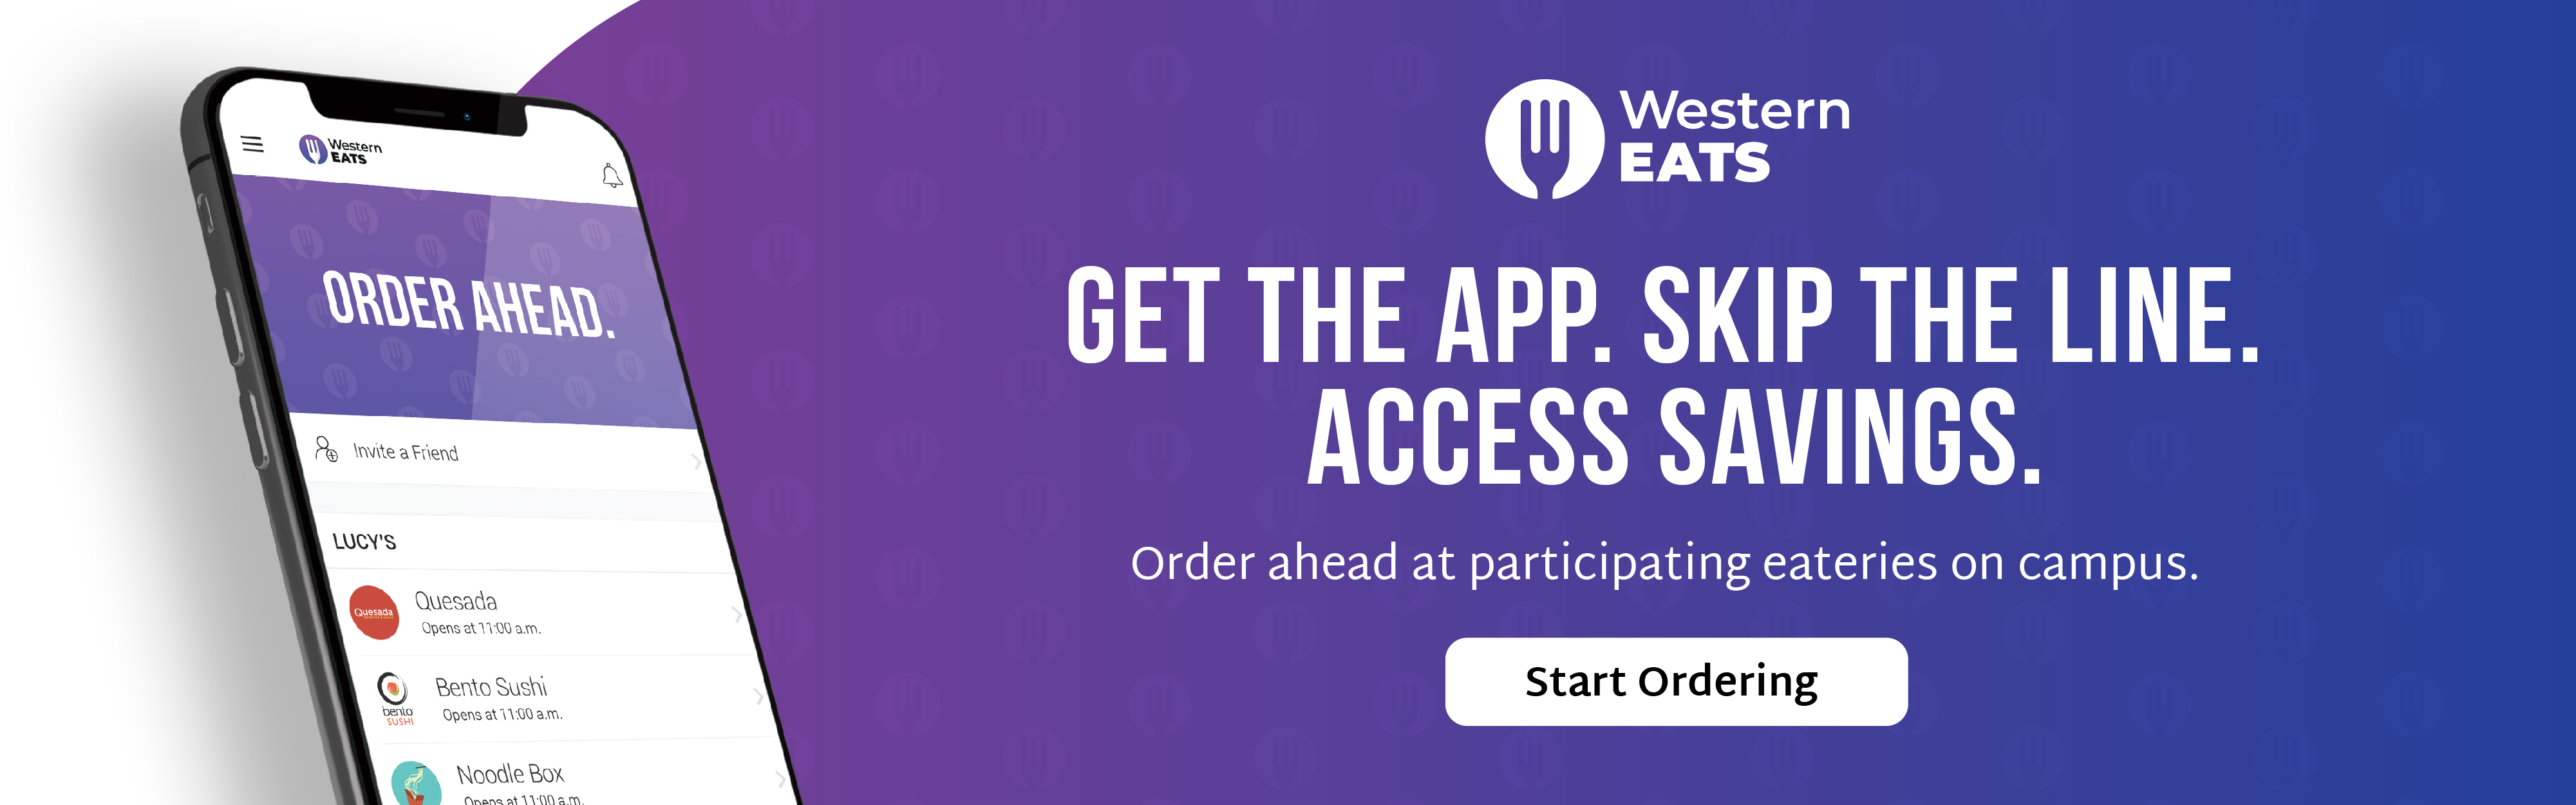 WesternEats. Get the app. Skip the line. Access savings. Order at participating eateries on campus. Start ordering.